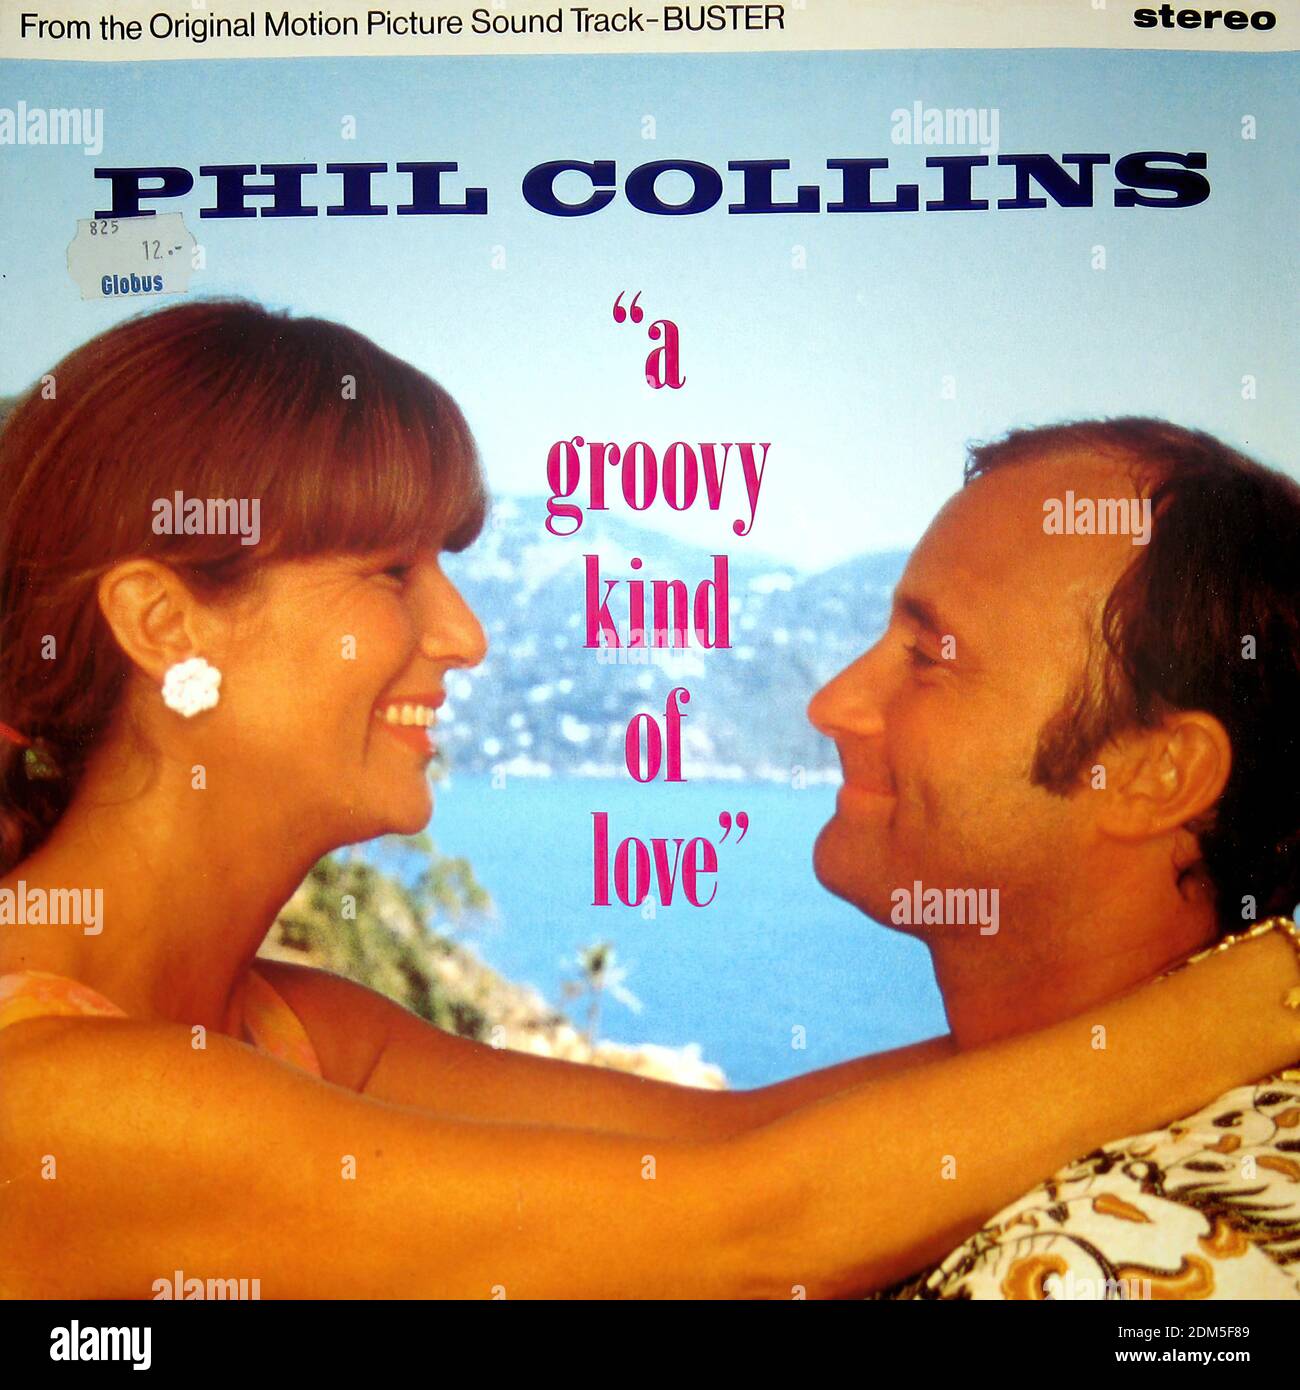 Phil Collins   A groovy kind of love (Buster Movie Soundtrack) - Vintage Vinyl Record Cover Stock Photo